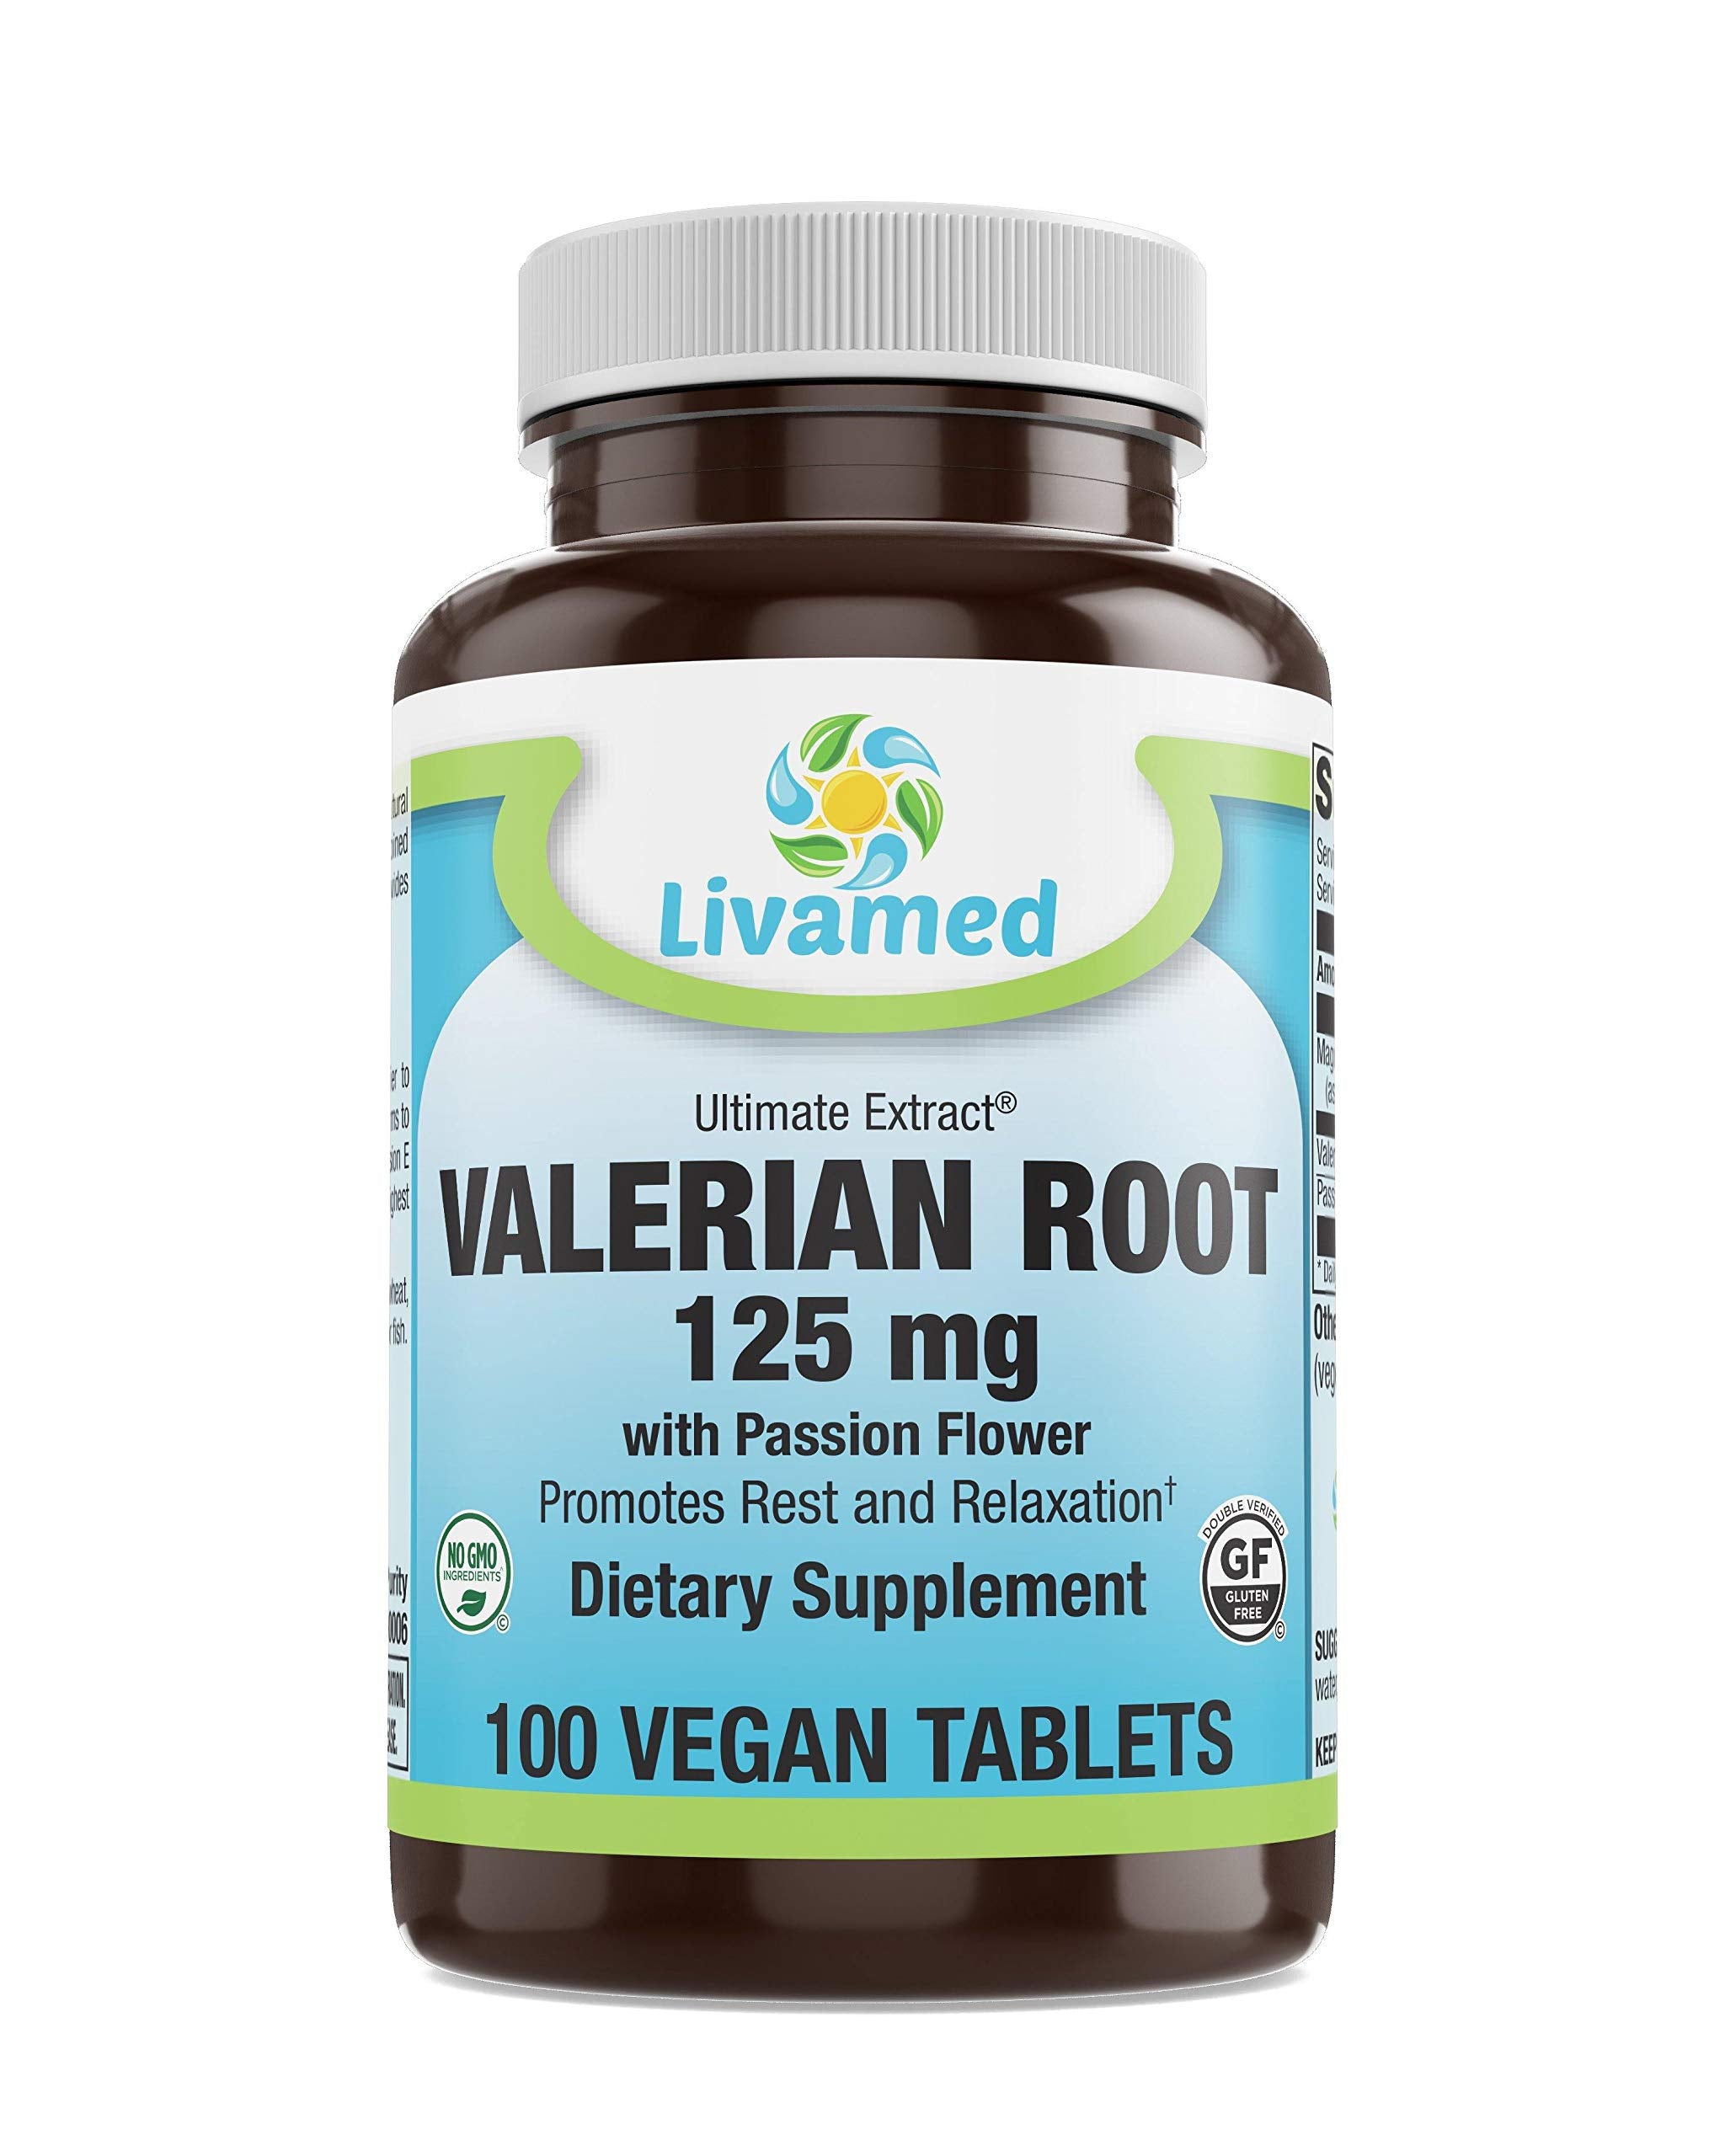 Livamed - Valerian Root 125 mg with Passion Flower Veg Tabs 100 Count